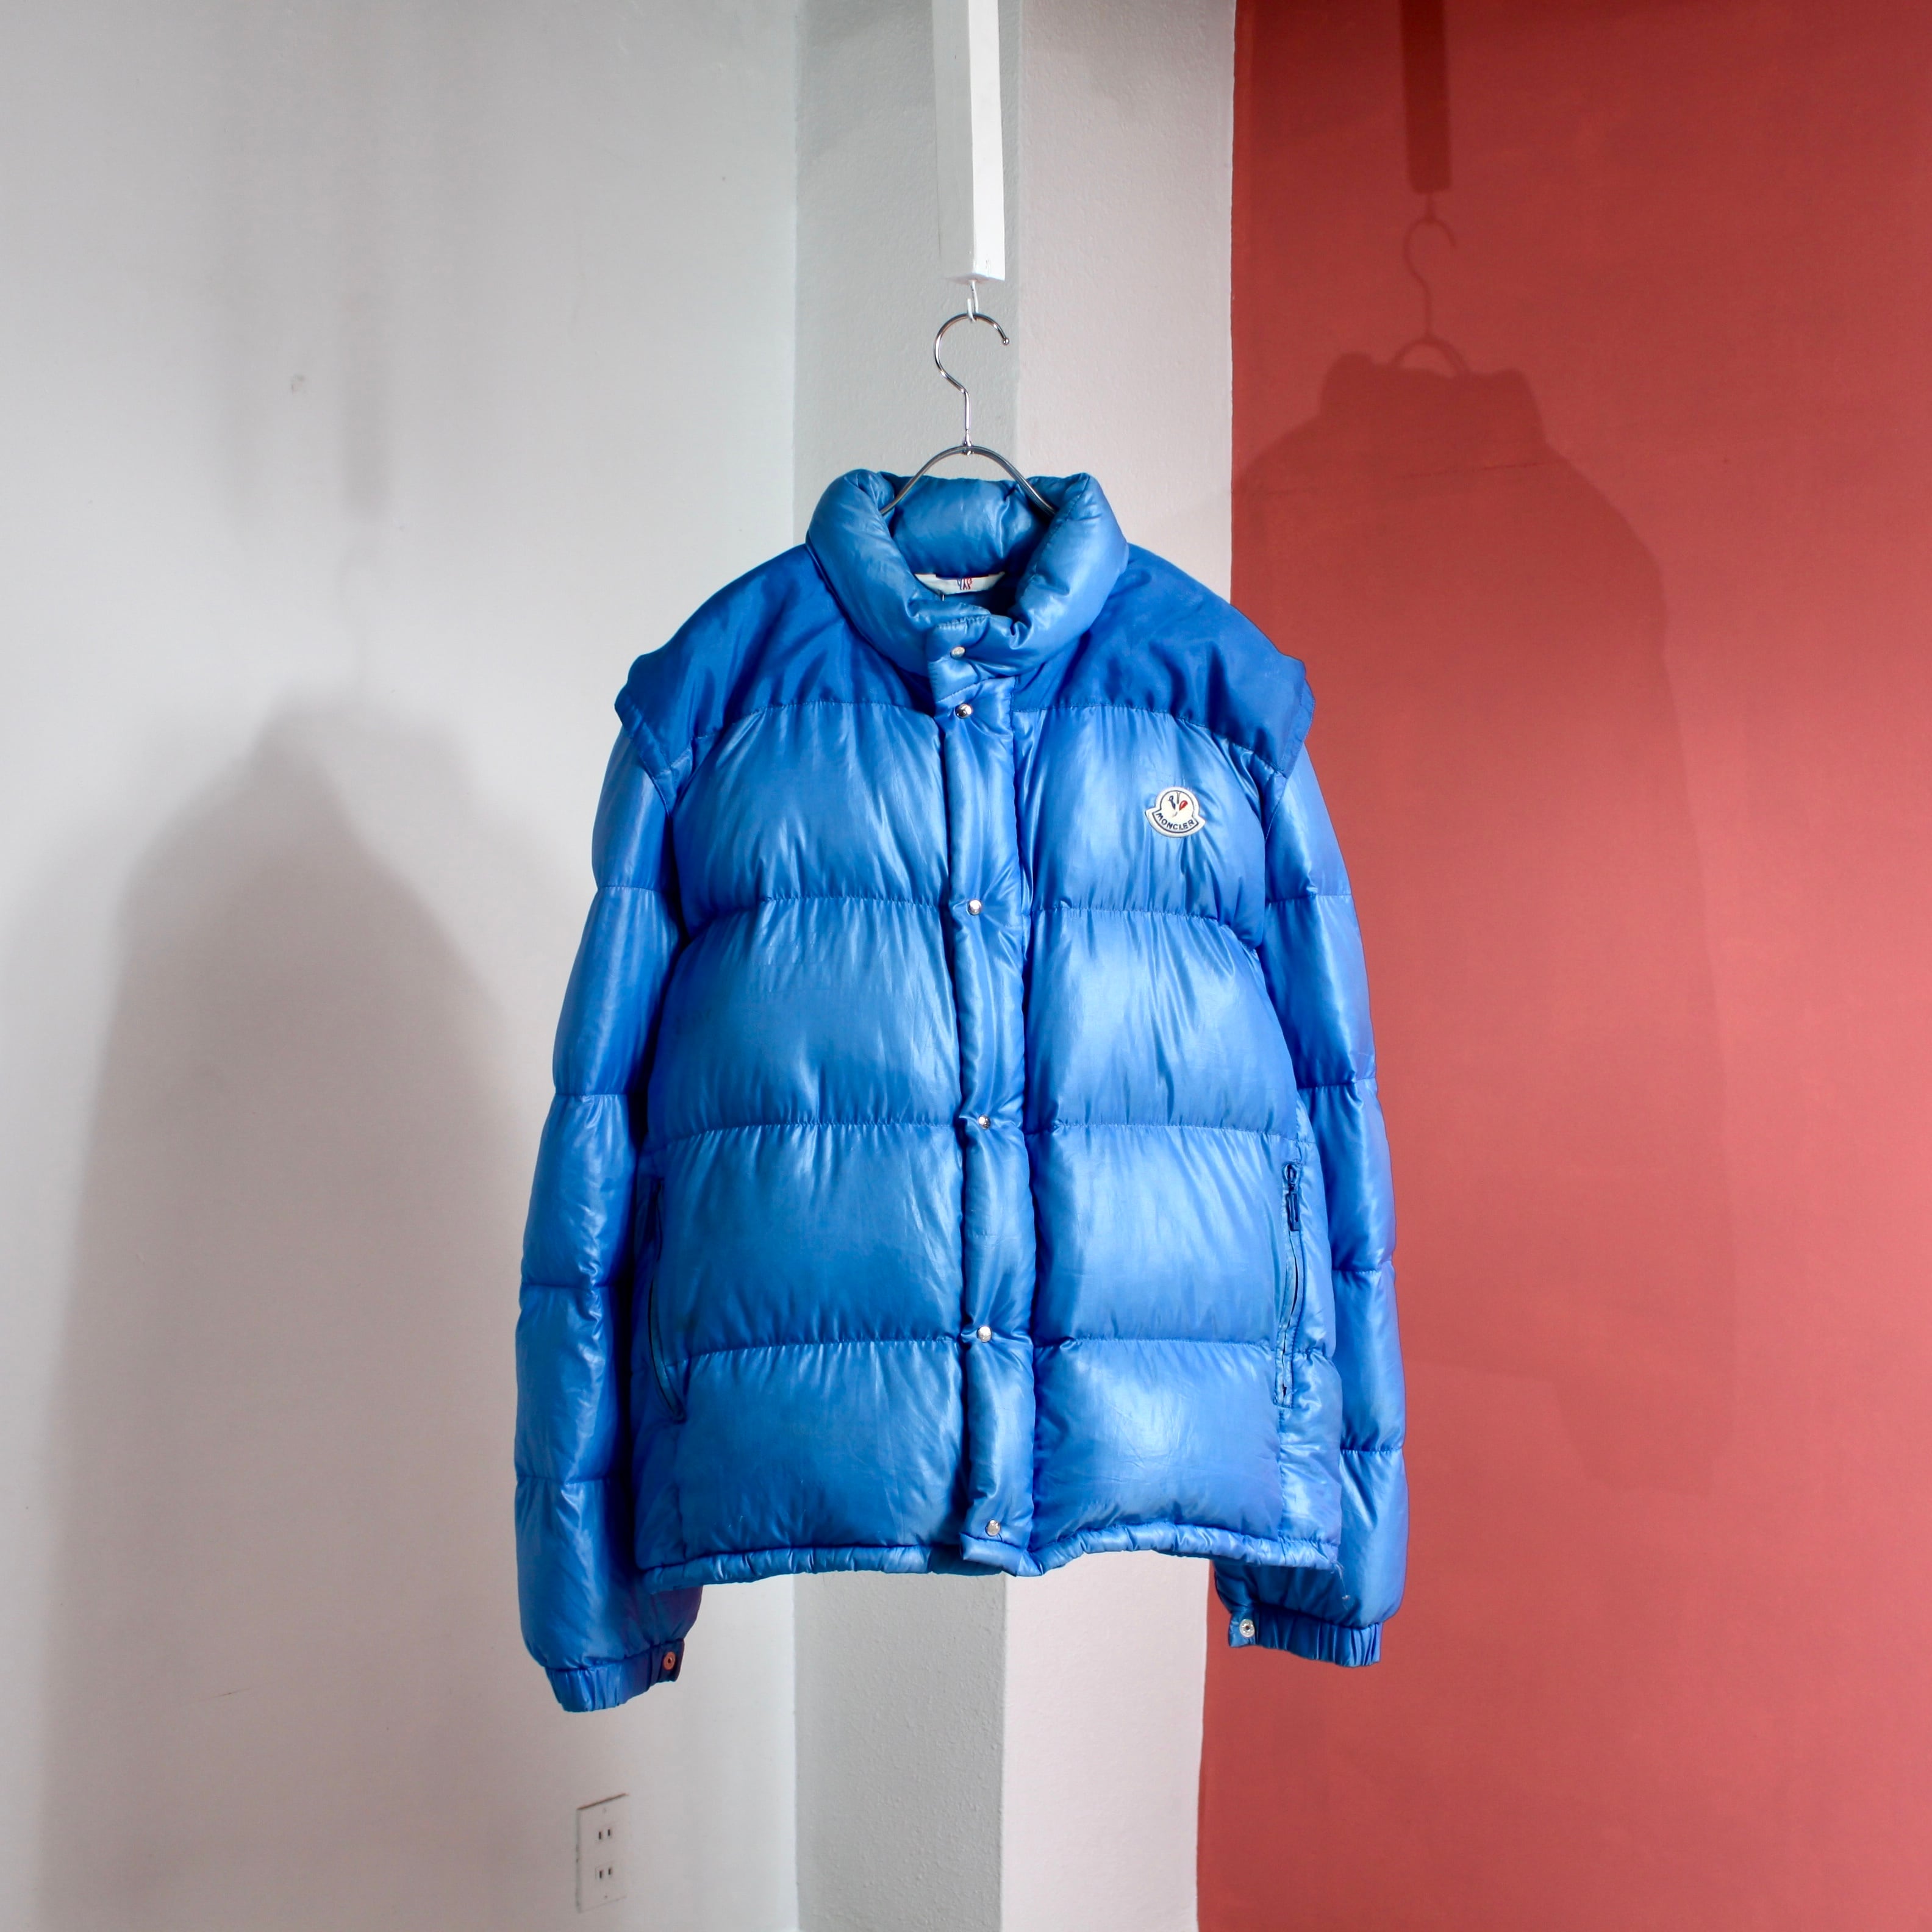 0580. 1980's Moncler Grenoble Down jacket with detachable arm